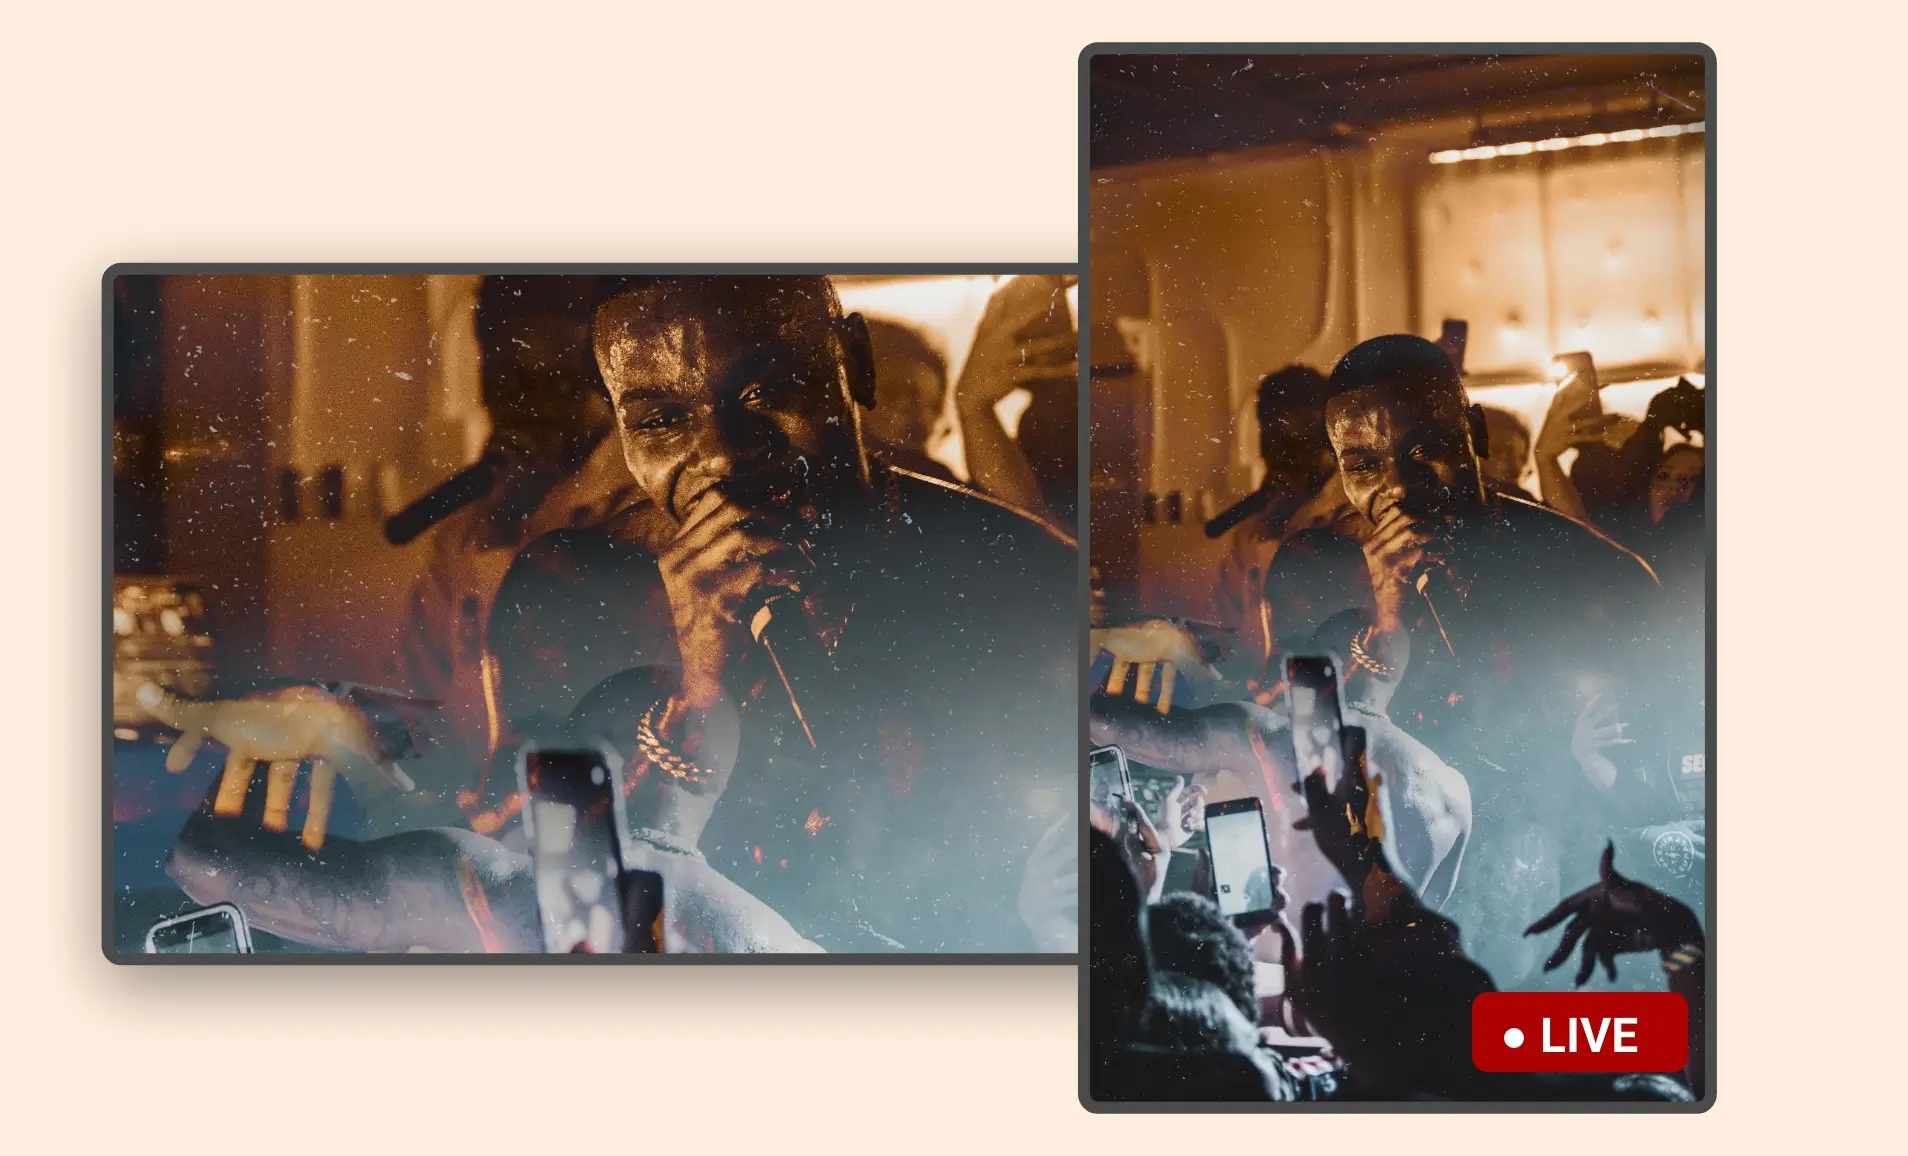 Streaming app feed preview in digital screens with landscape and portrait layouts